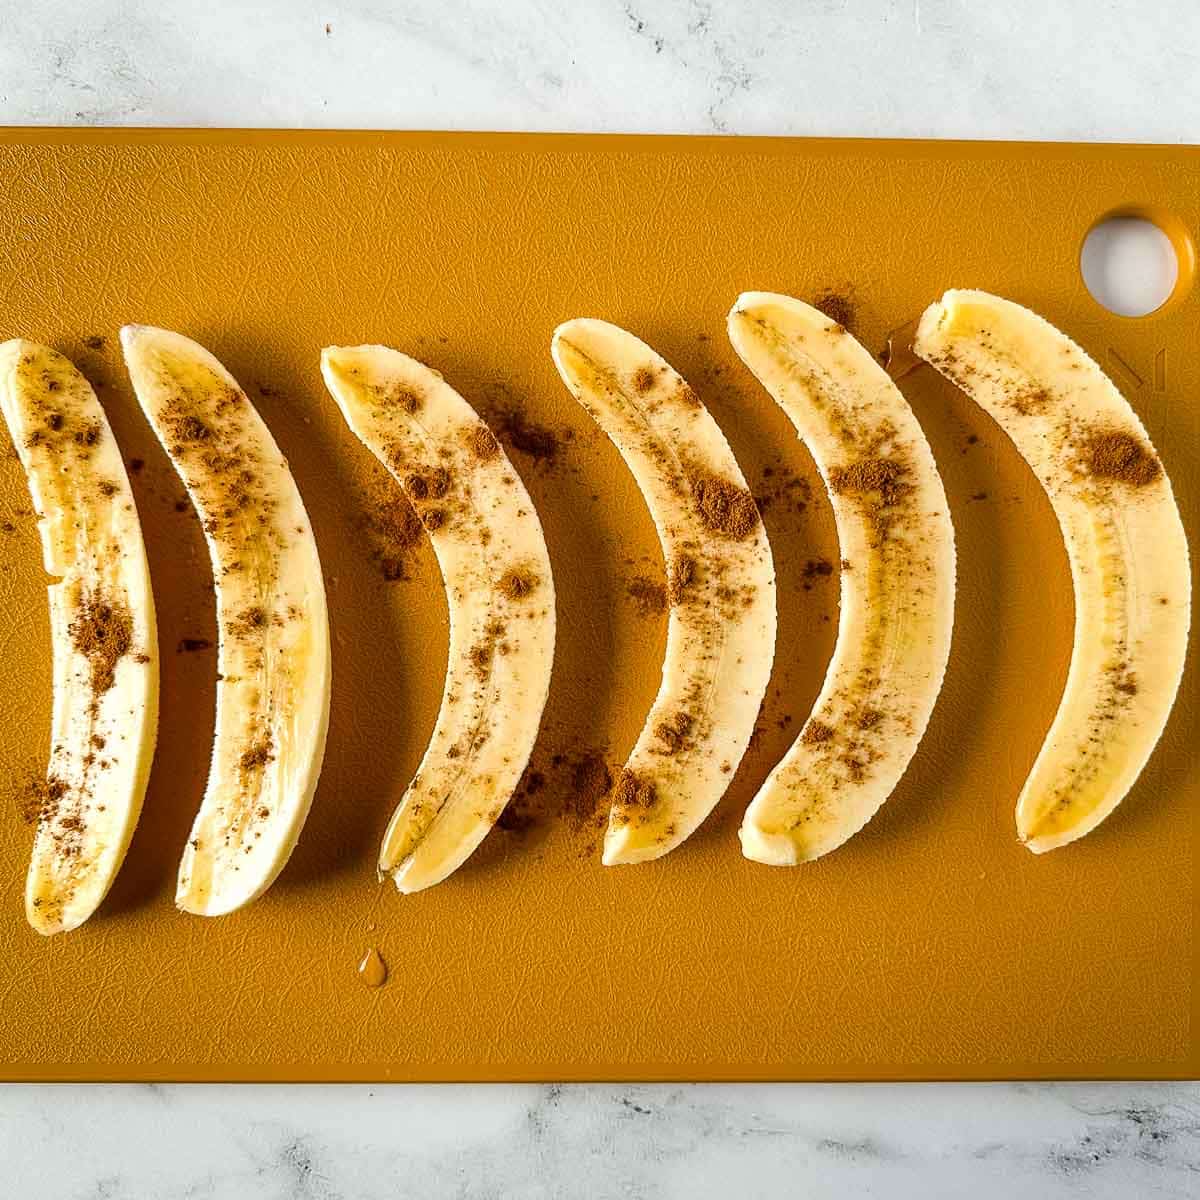 halved bananas are dusted with cinnamon.